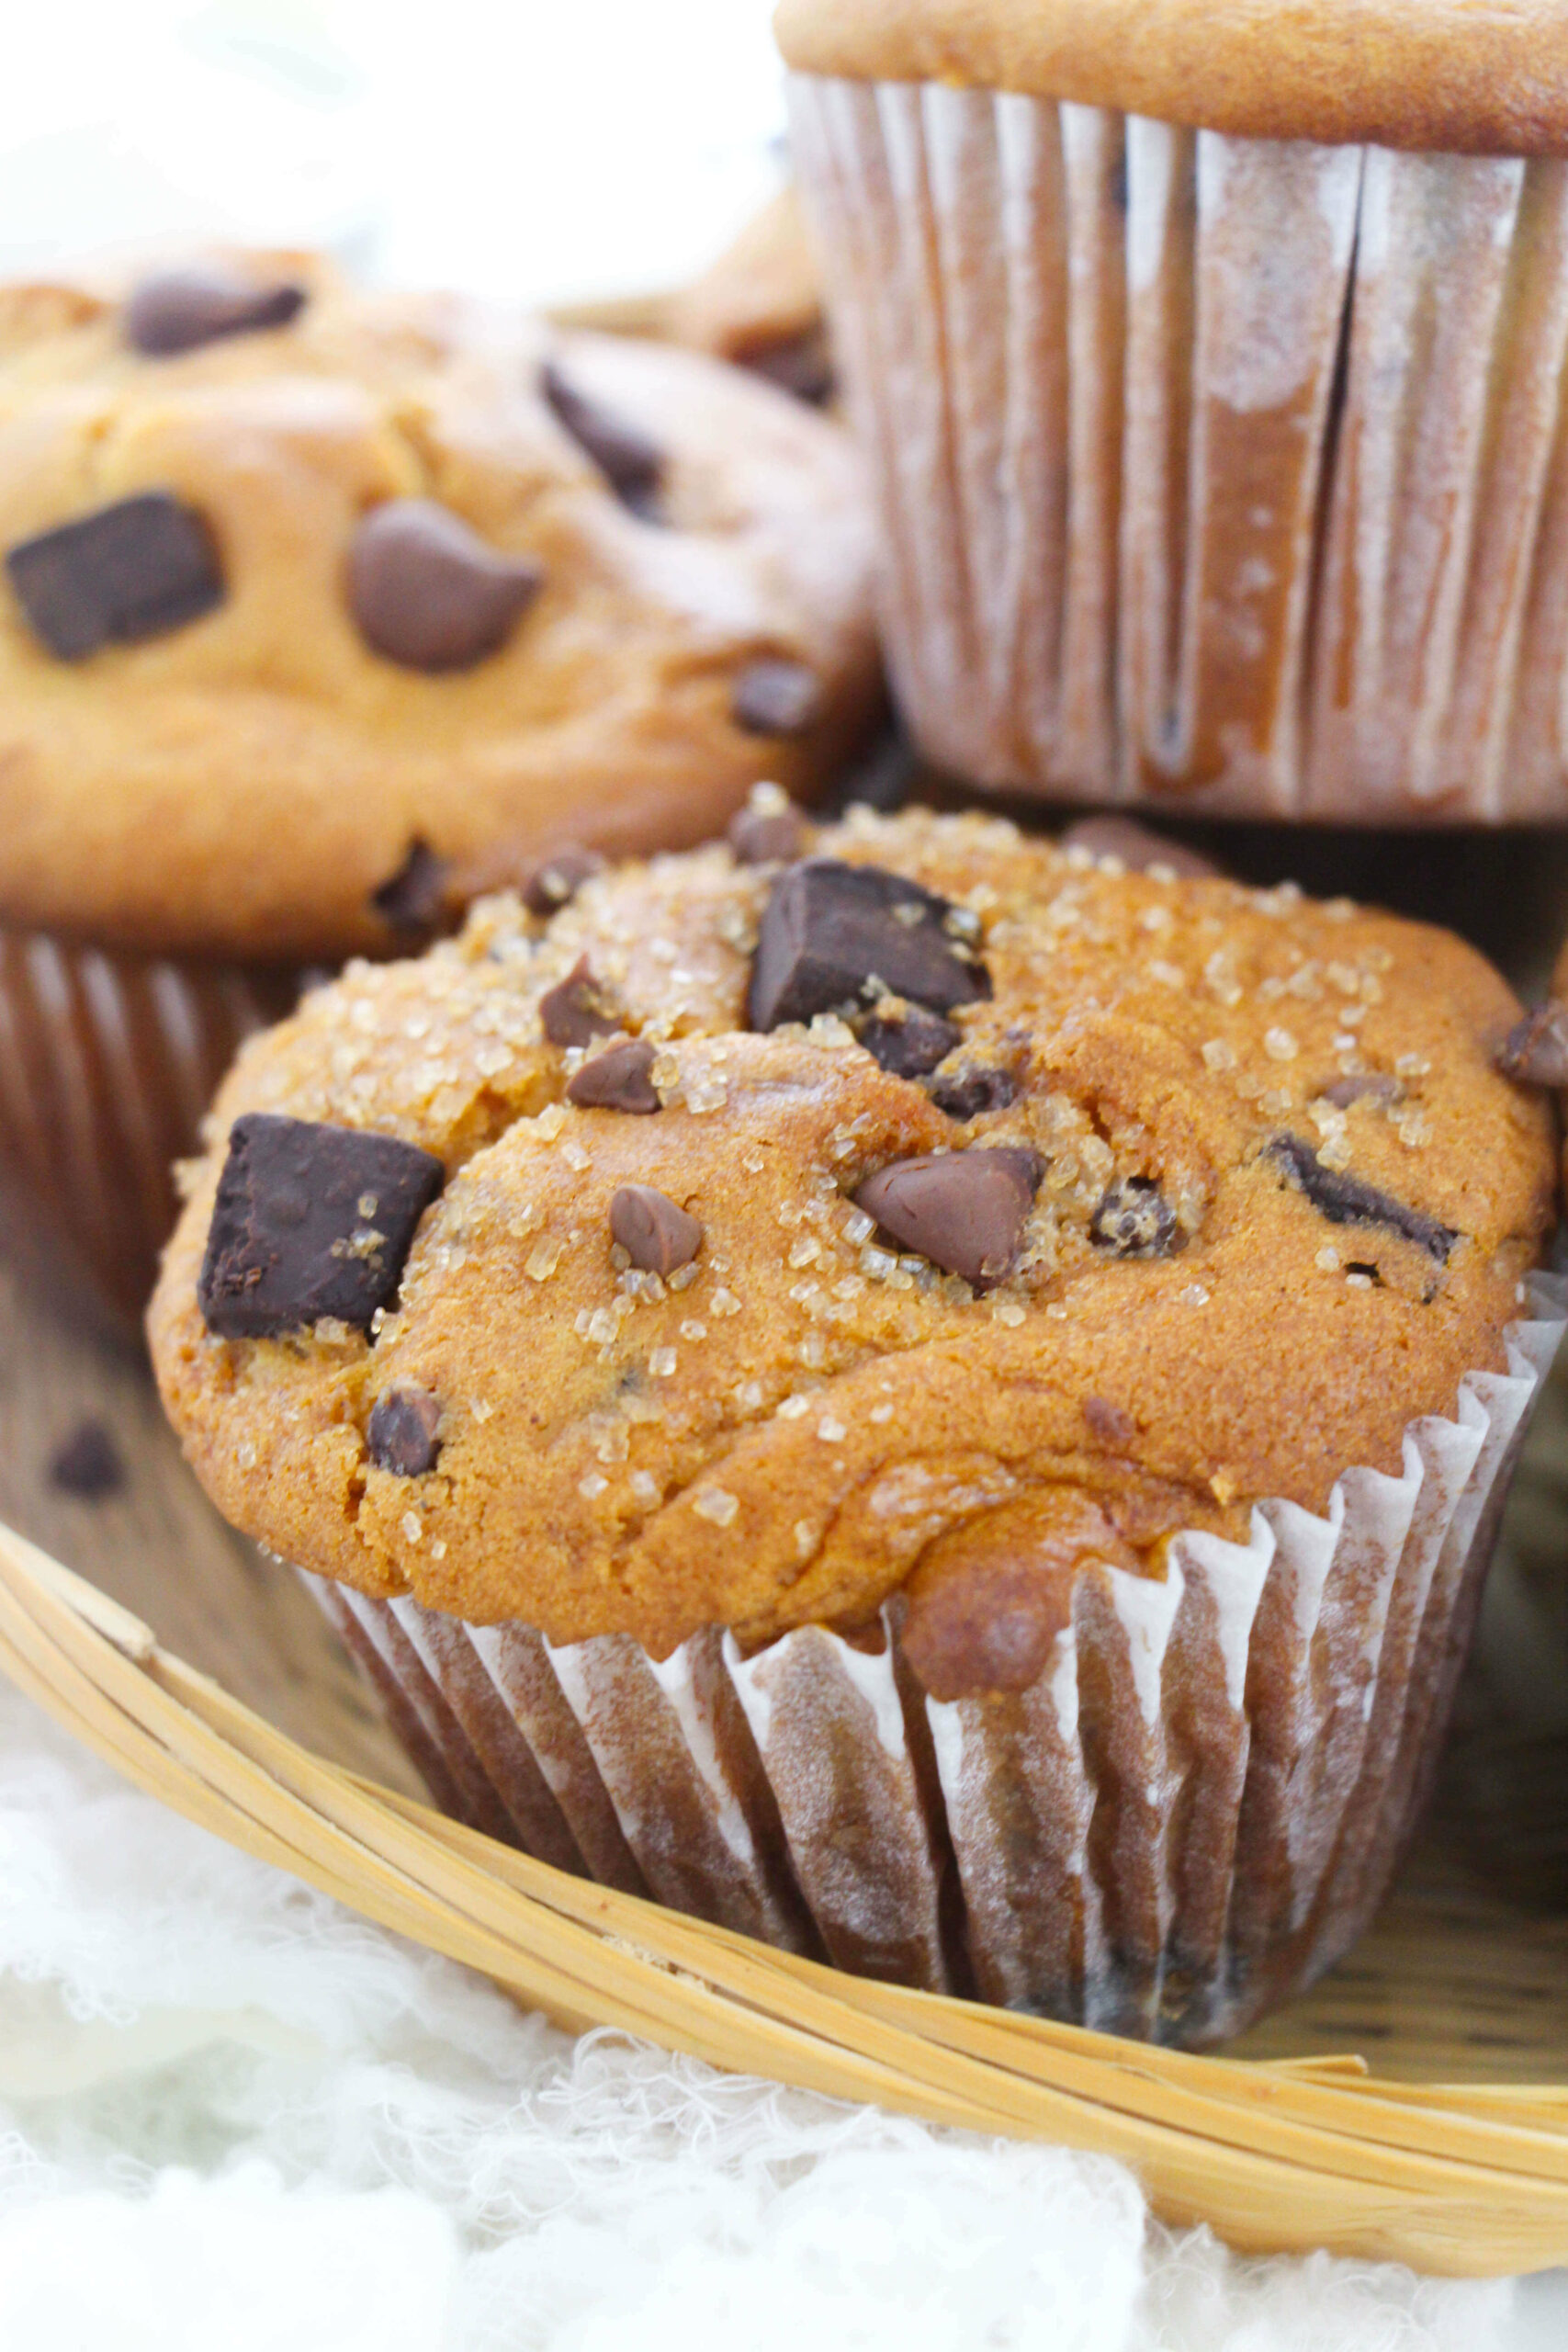 A tray of Bakery Style Chocolate Chip Muffins.